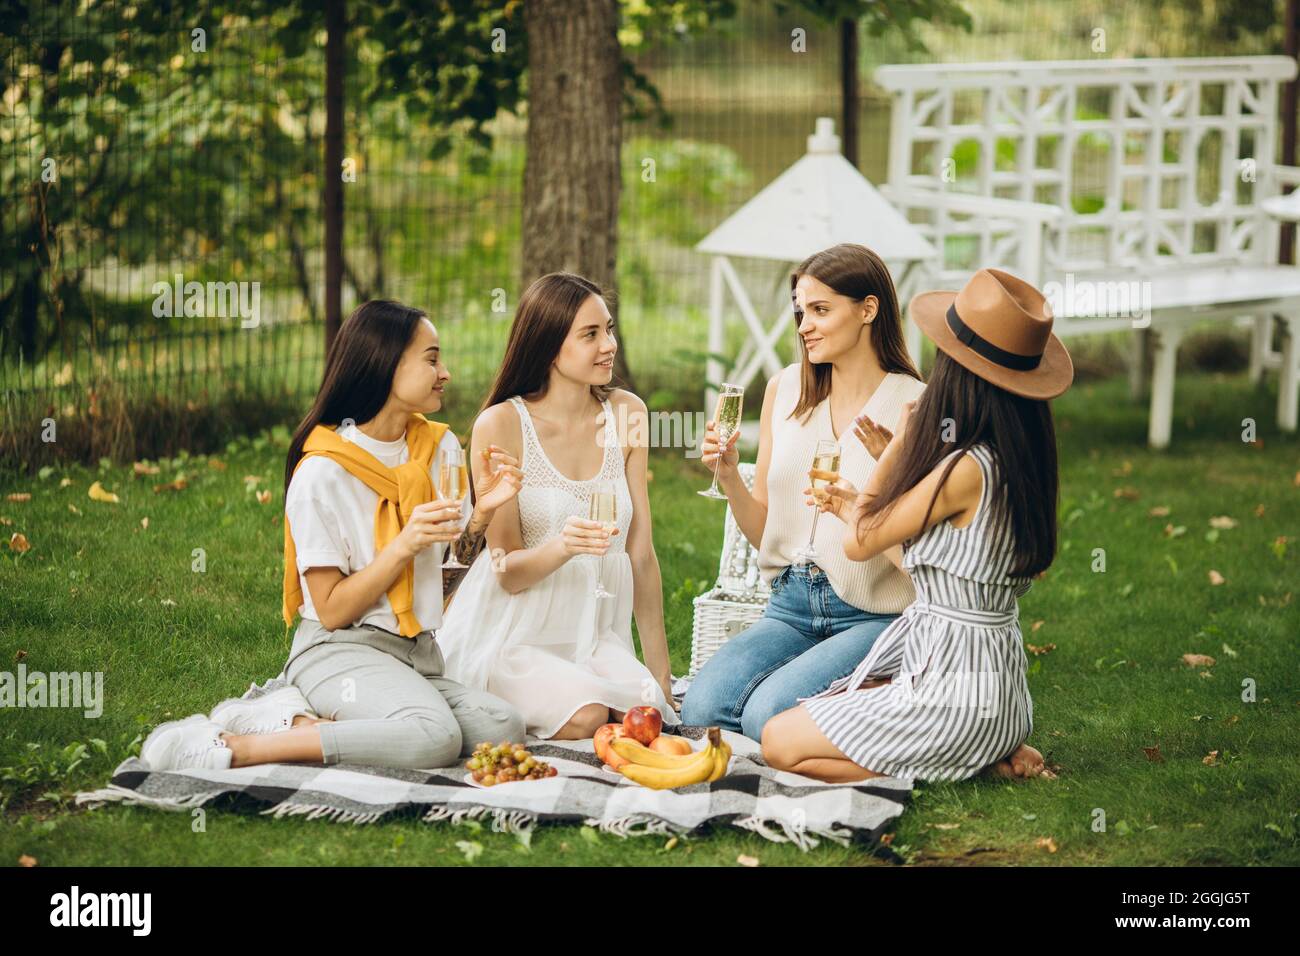 Four Beautiful Young Girls Sitting On Grass And Having Picnic Stock